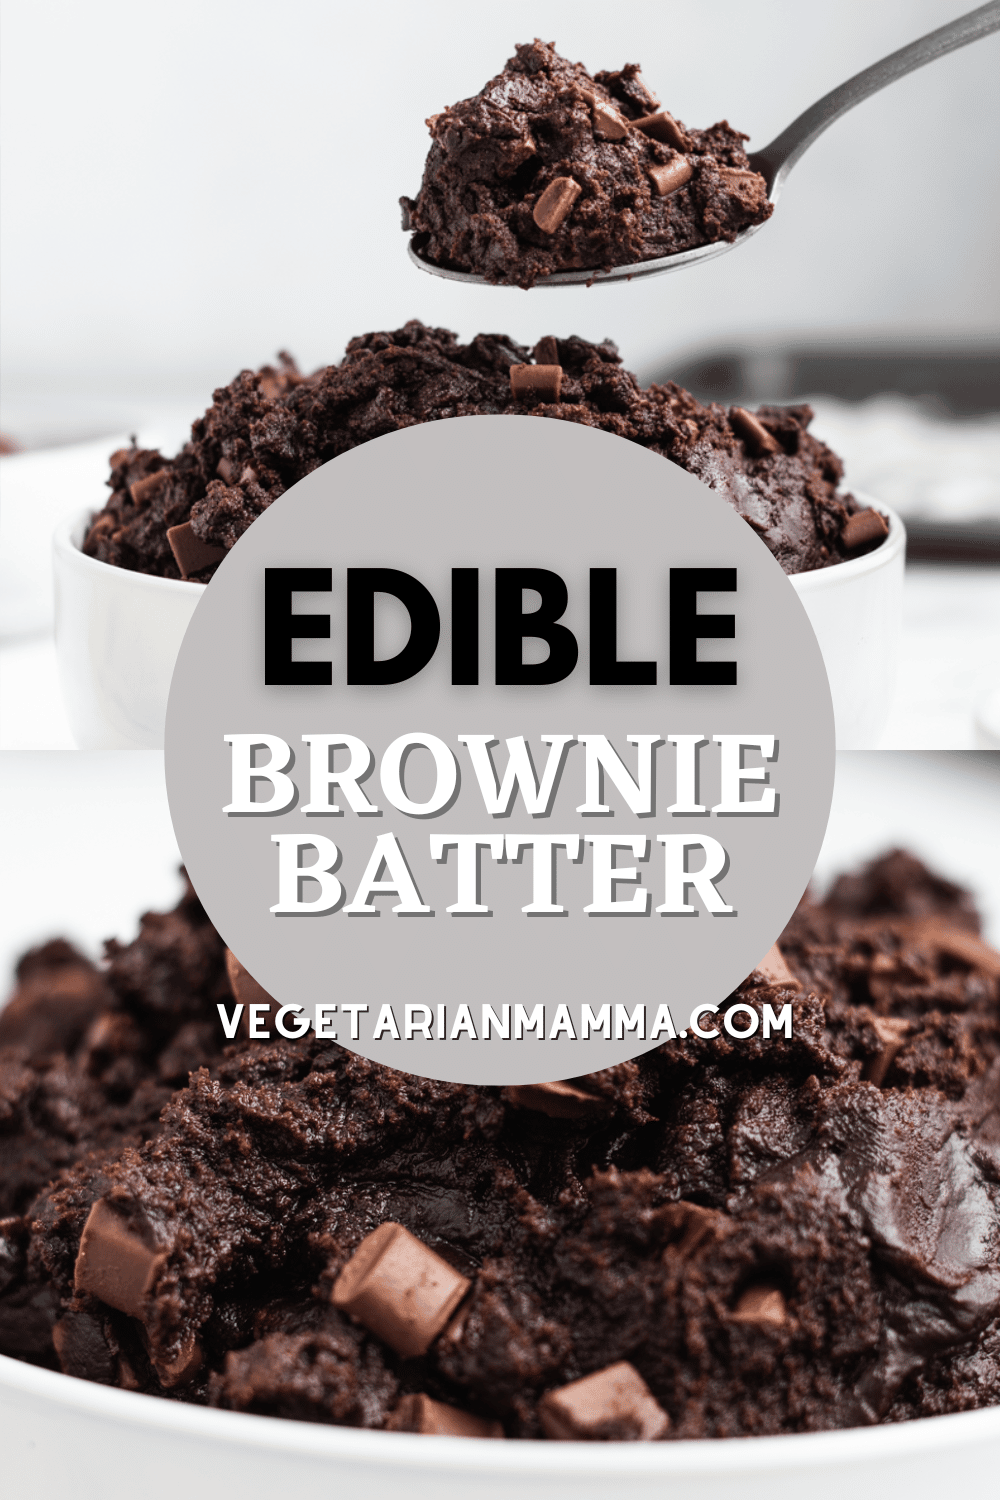 This rich and fudgy edible brownie batter is gluten-free, simple to make, and the perfect decadent dessert.